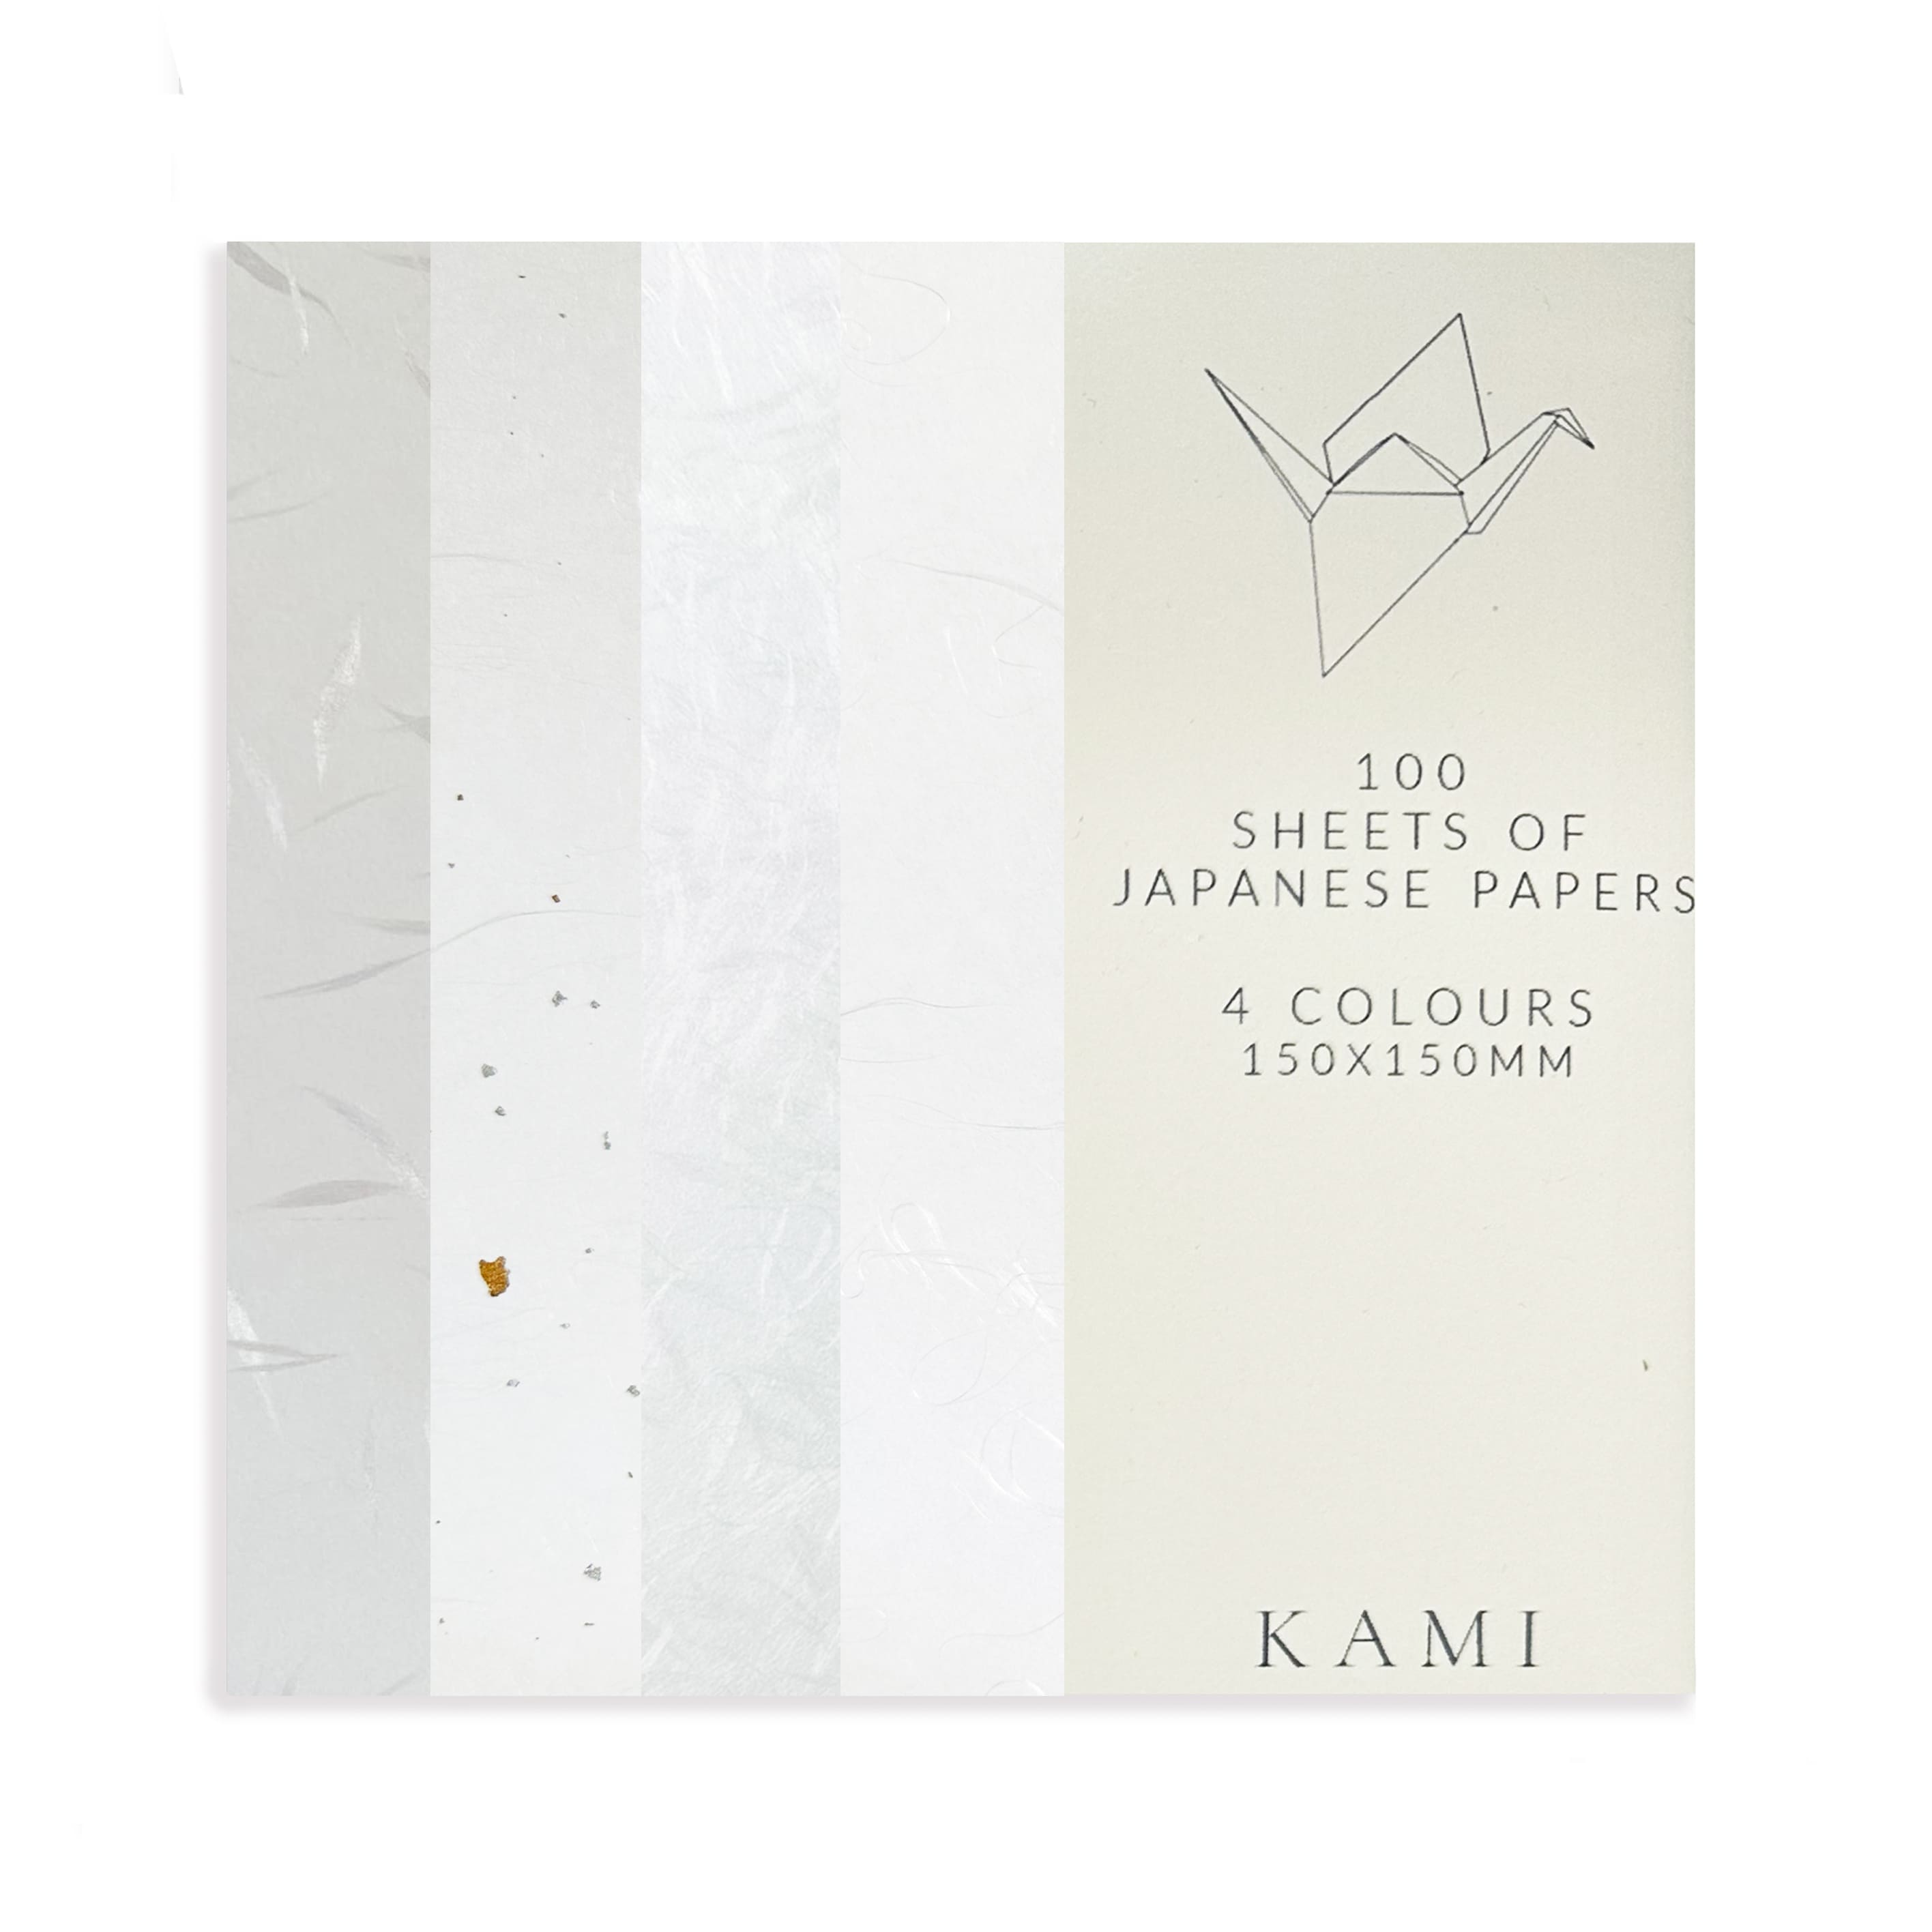 Origami Paper | Unprinted Japanese | 4 Colours | 100 Sheets | 150mm x 150mm | Kami Paper | 5 DESIGN OPTIONS AVAILABLE